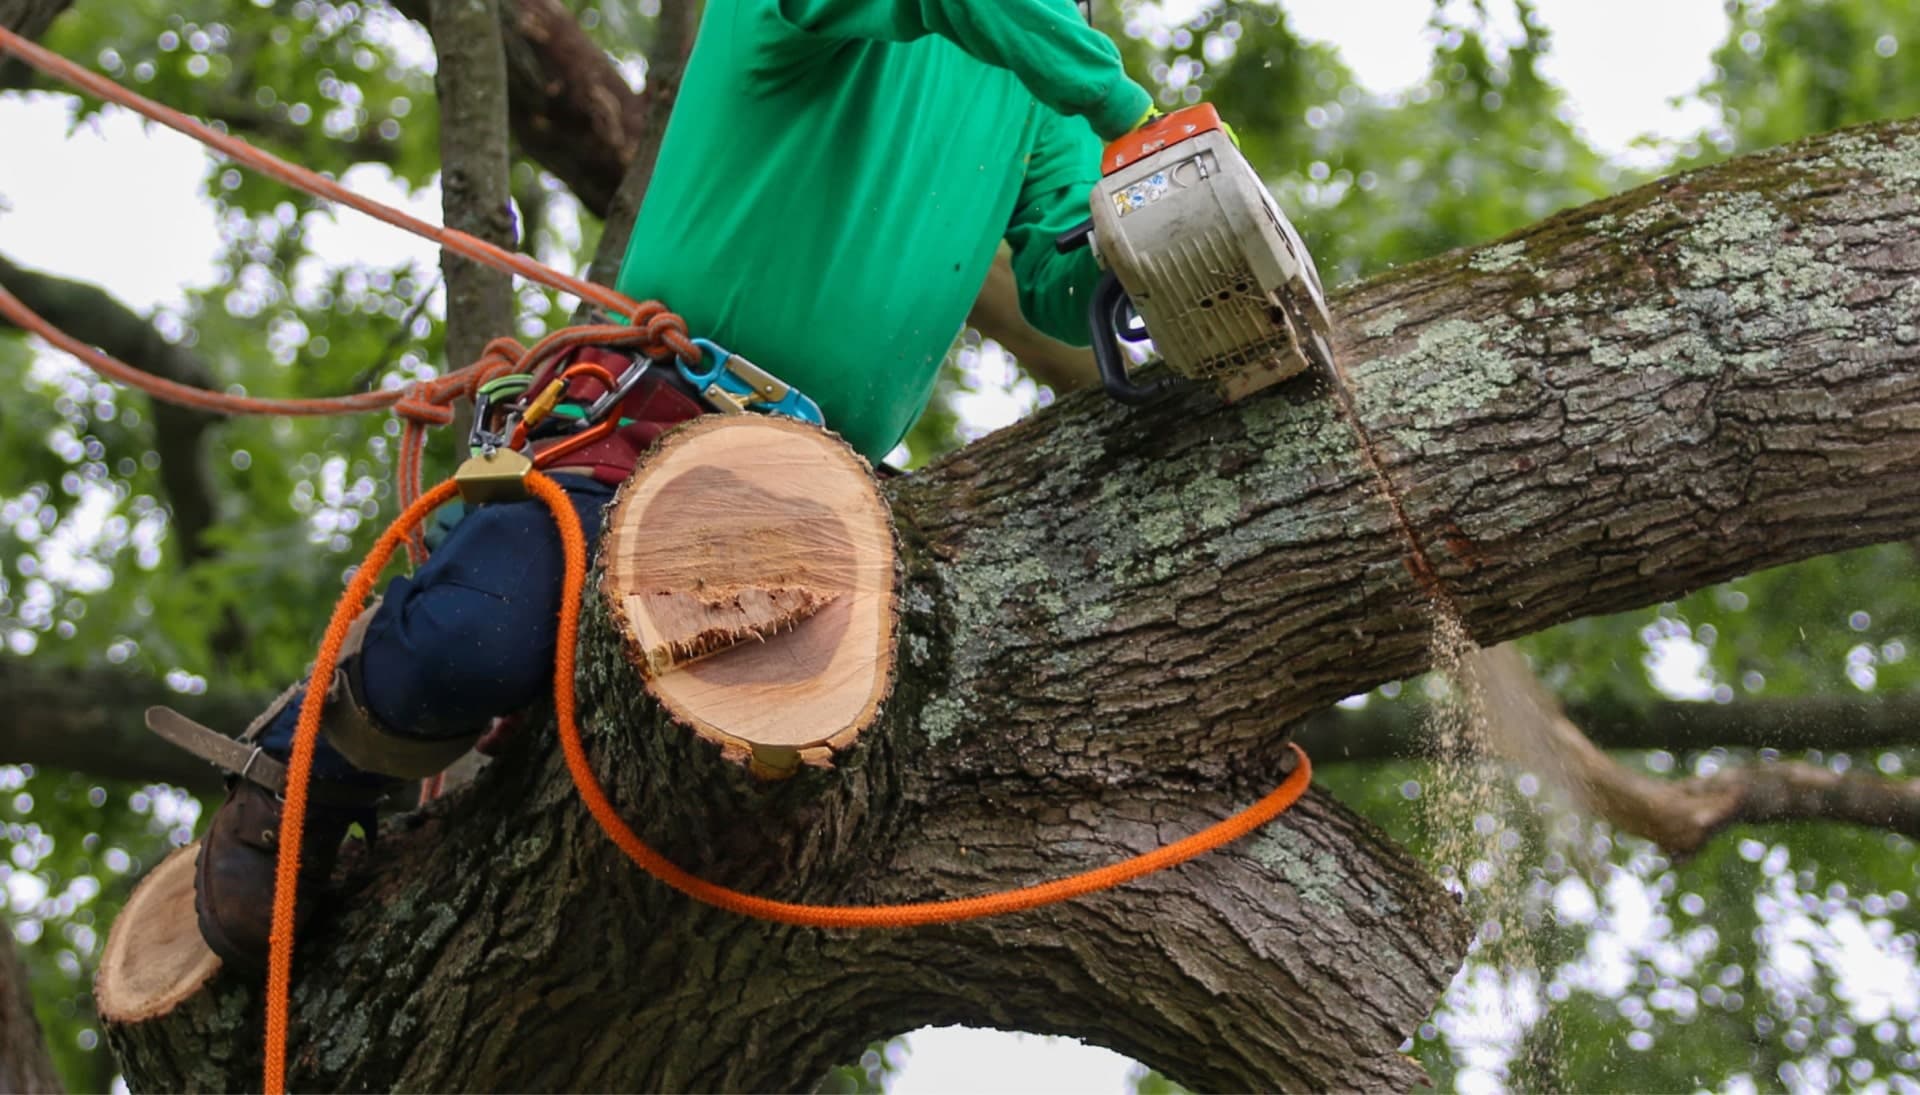 Shed your worries away with best tree removal in Greenville